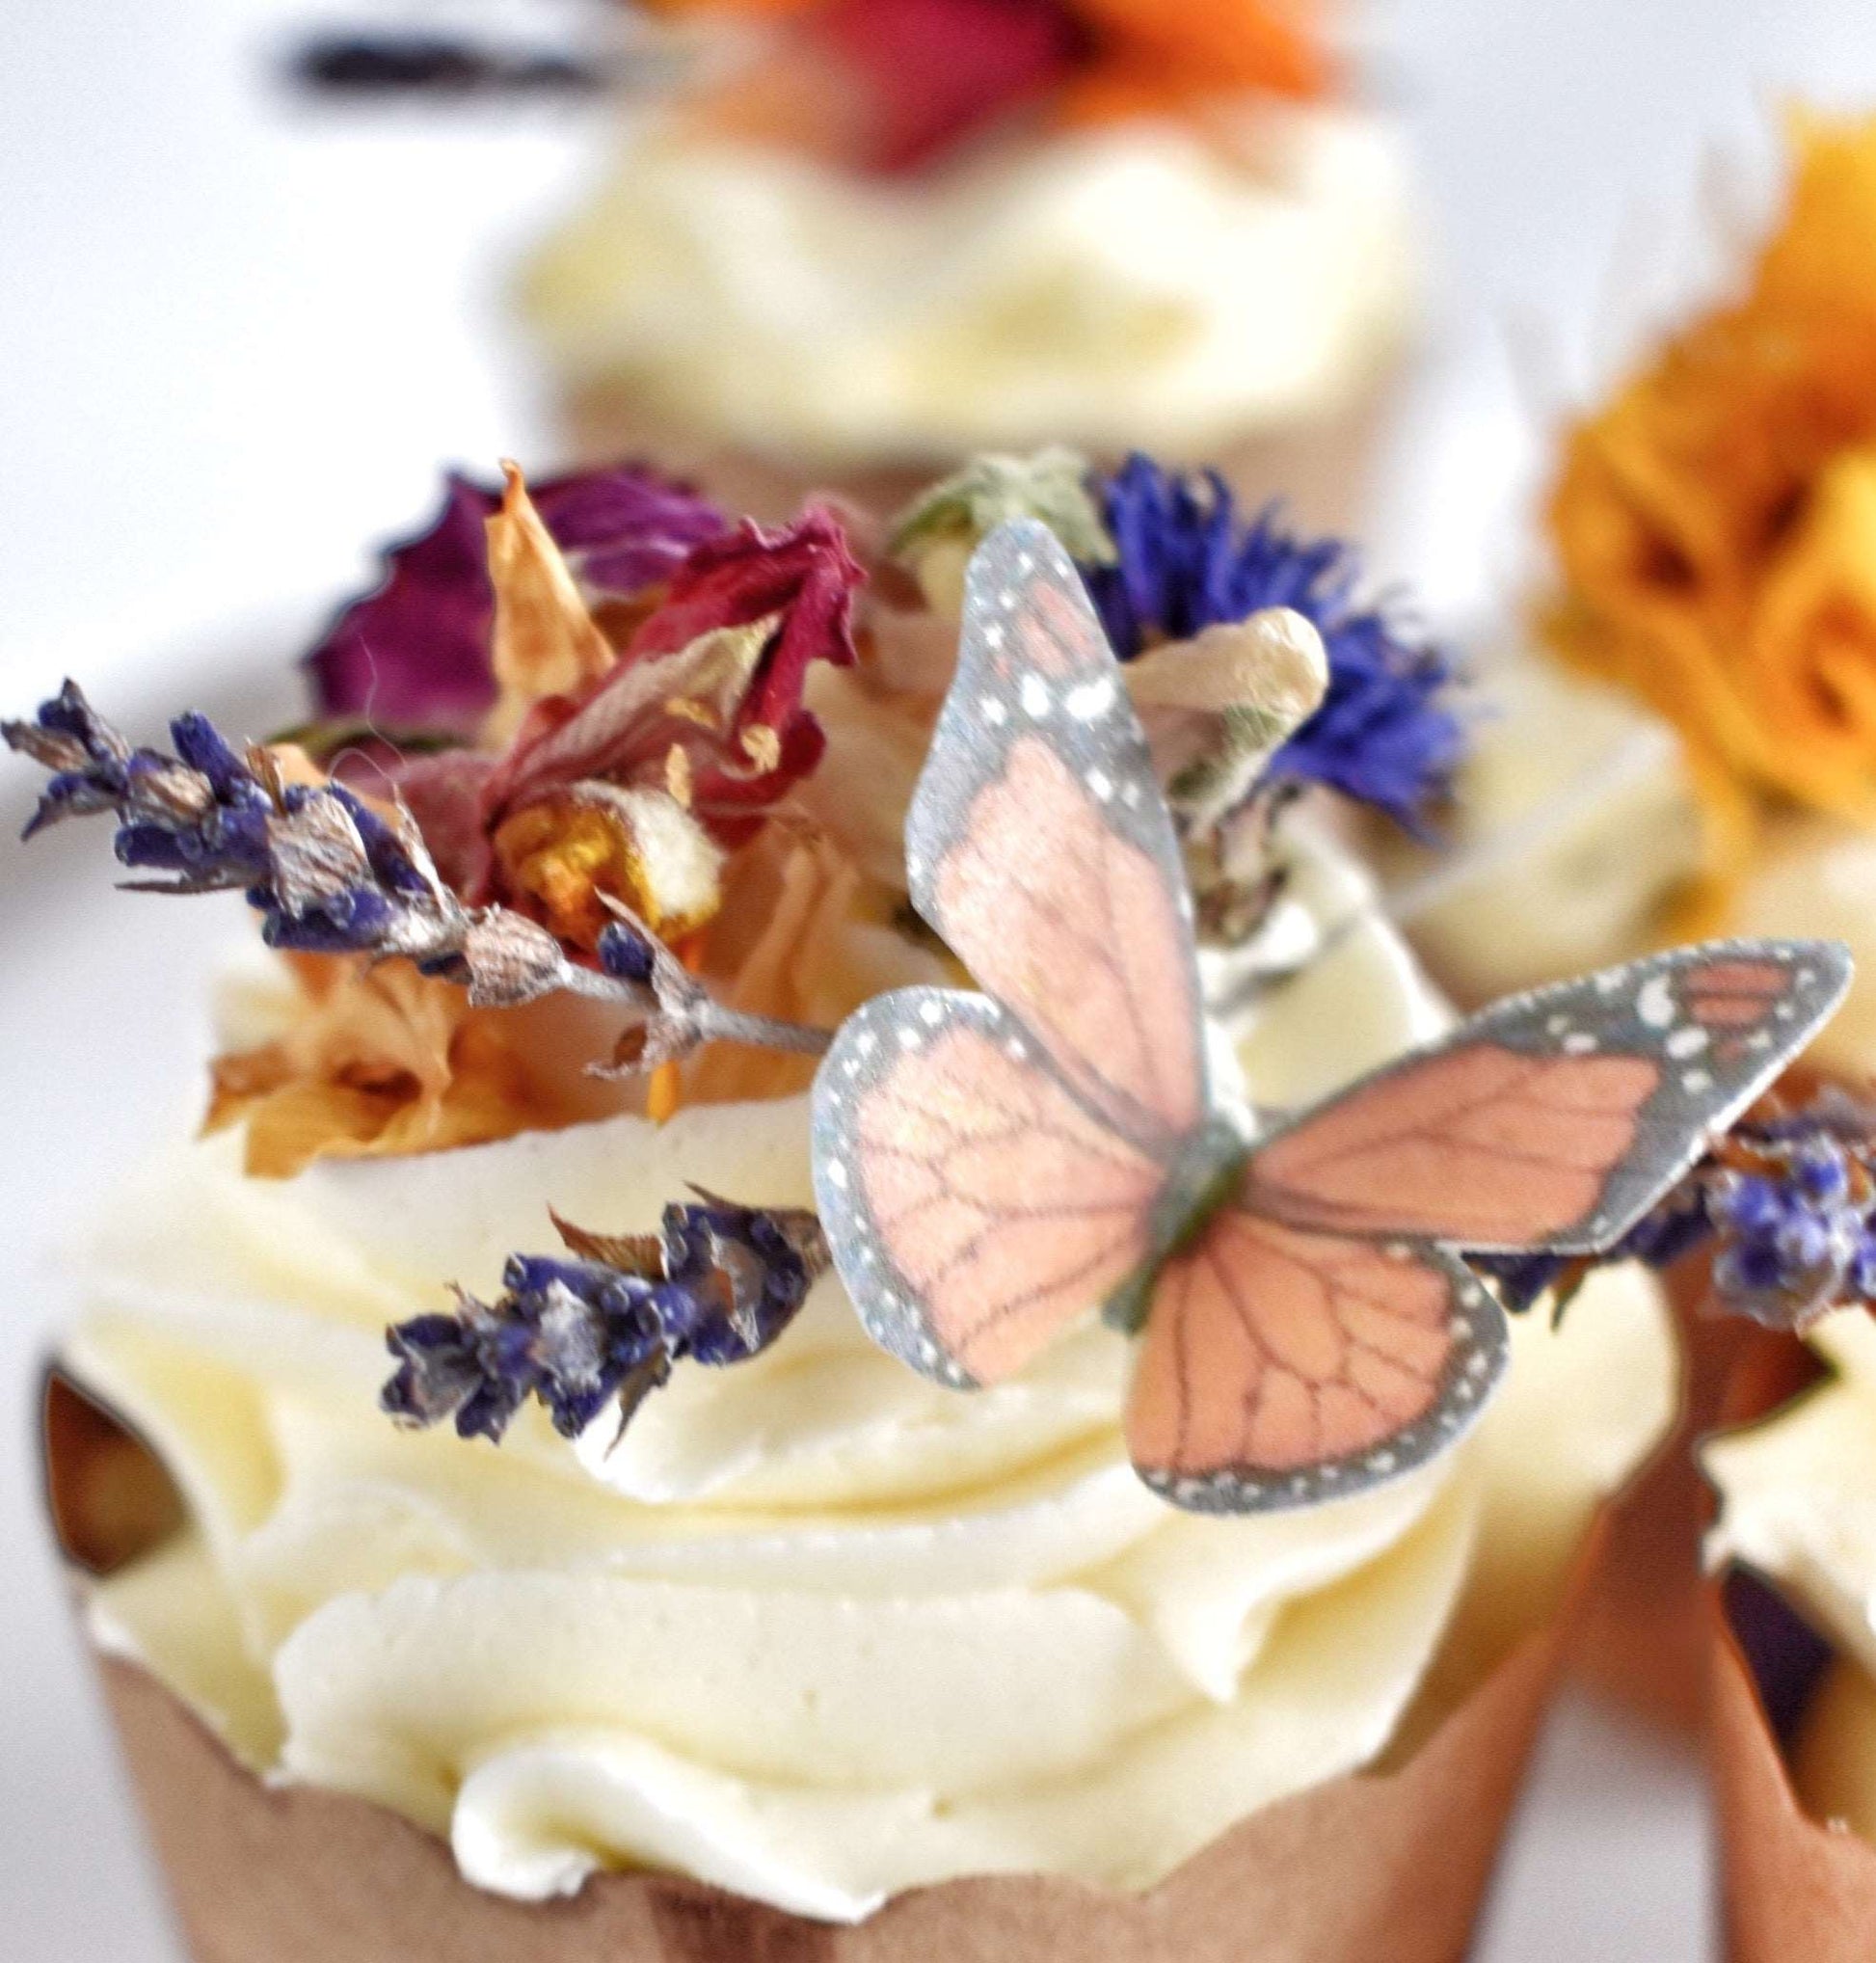 Garden Picnic Cupcakes, Backyard Picnic Cupcakes, Gift Idea For Mother's Day, Natural Floral Cupcakes, DIY Cupcake Kit with Flowers and Butterflies, Natural Cupcakes, Vegan and Gluten-free Cupcakes